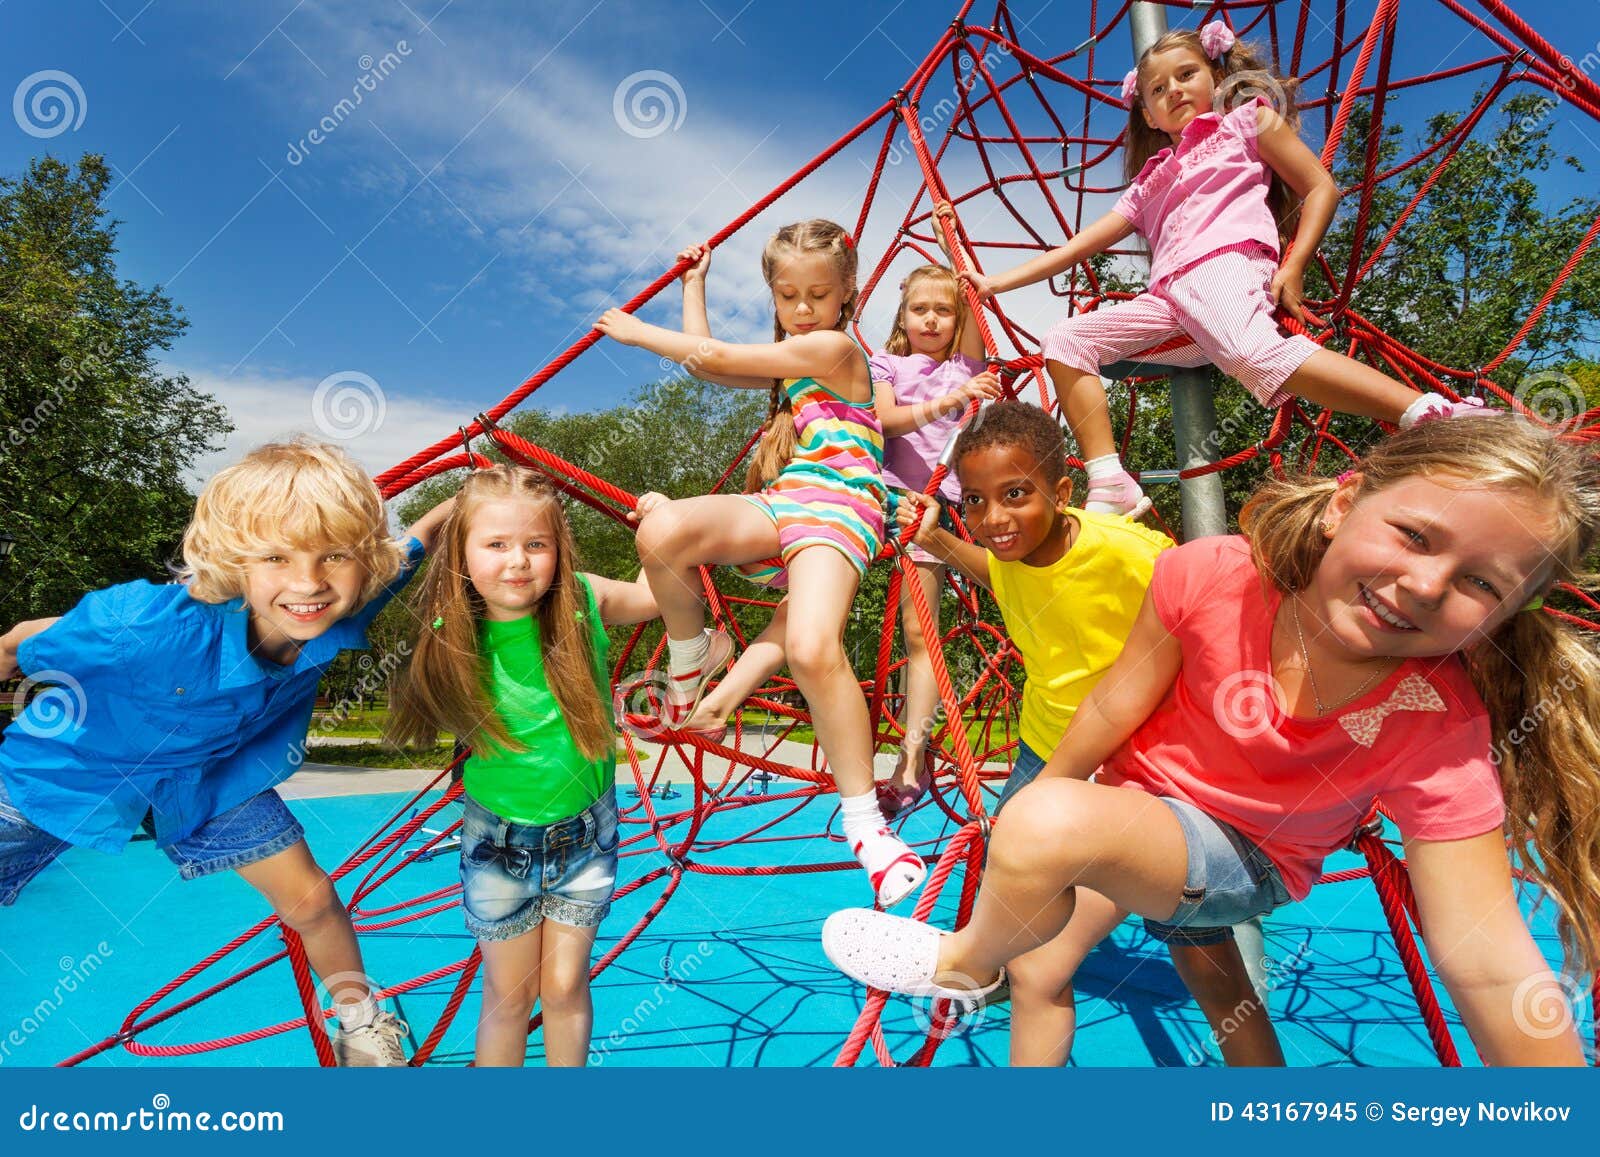 happy-group-kids-red-ropes-together-park